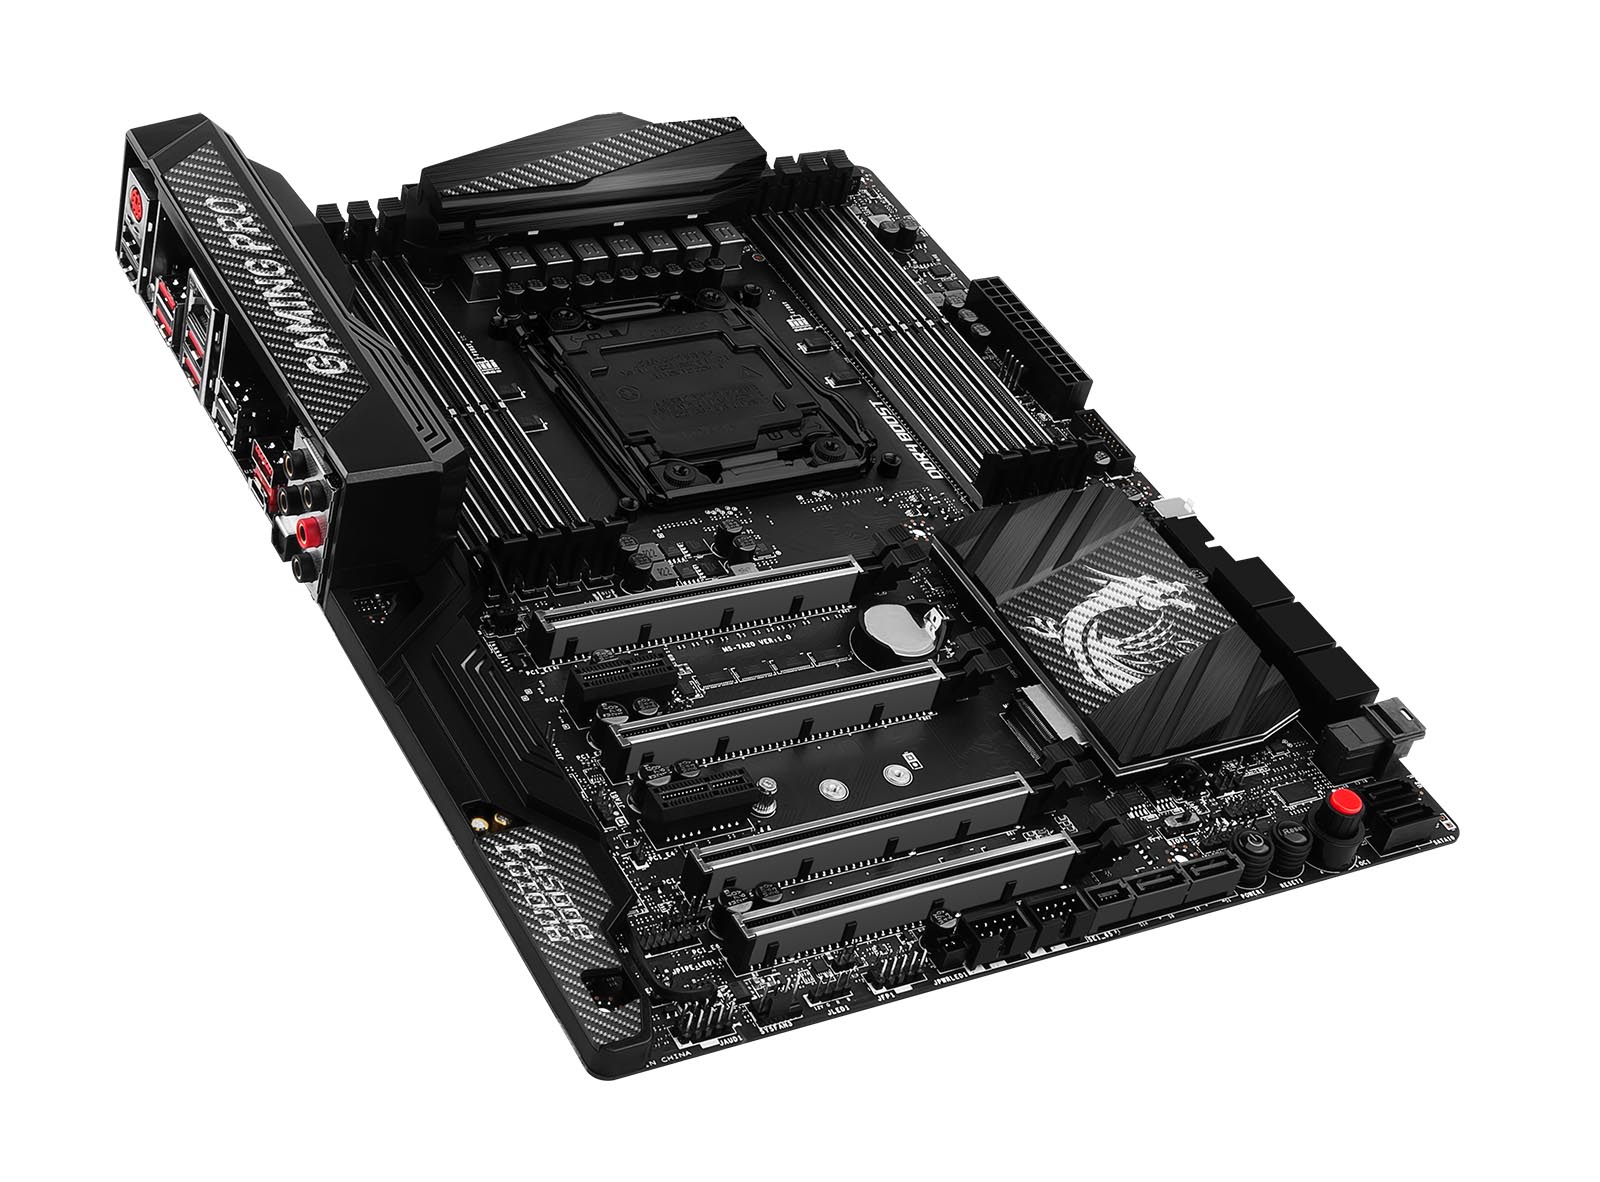 MSI X99A Gaming Pro Carbon - Draufsicht